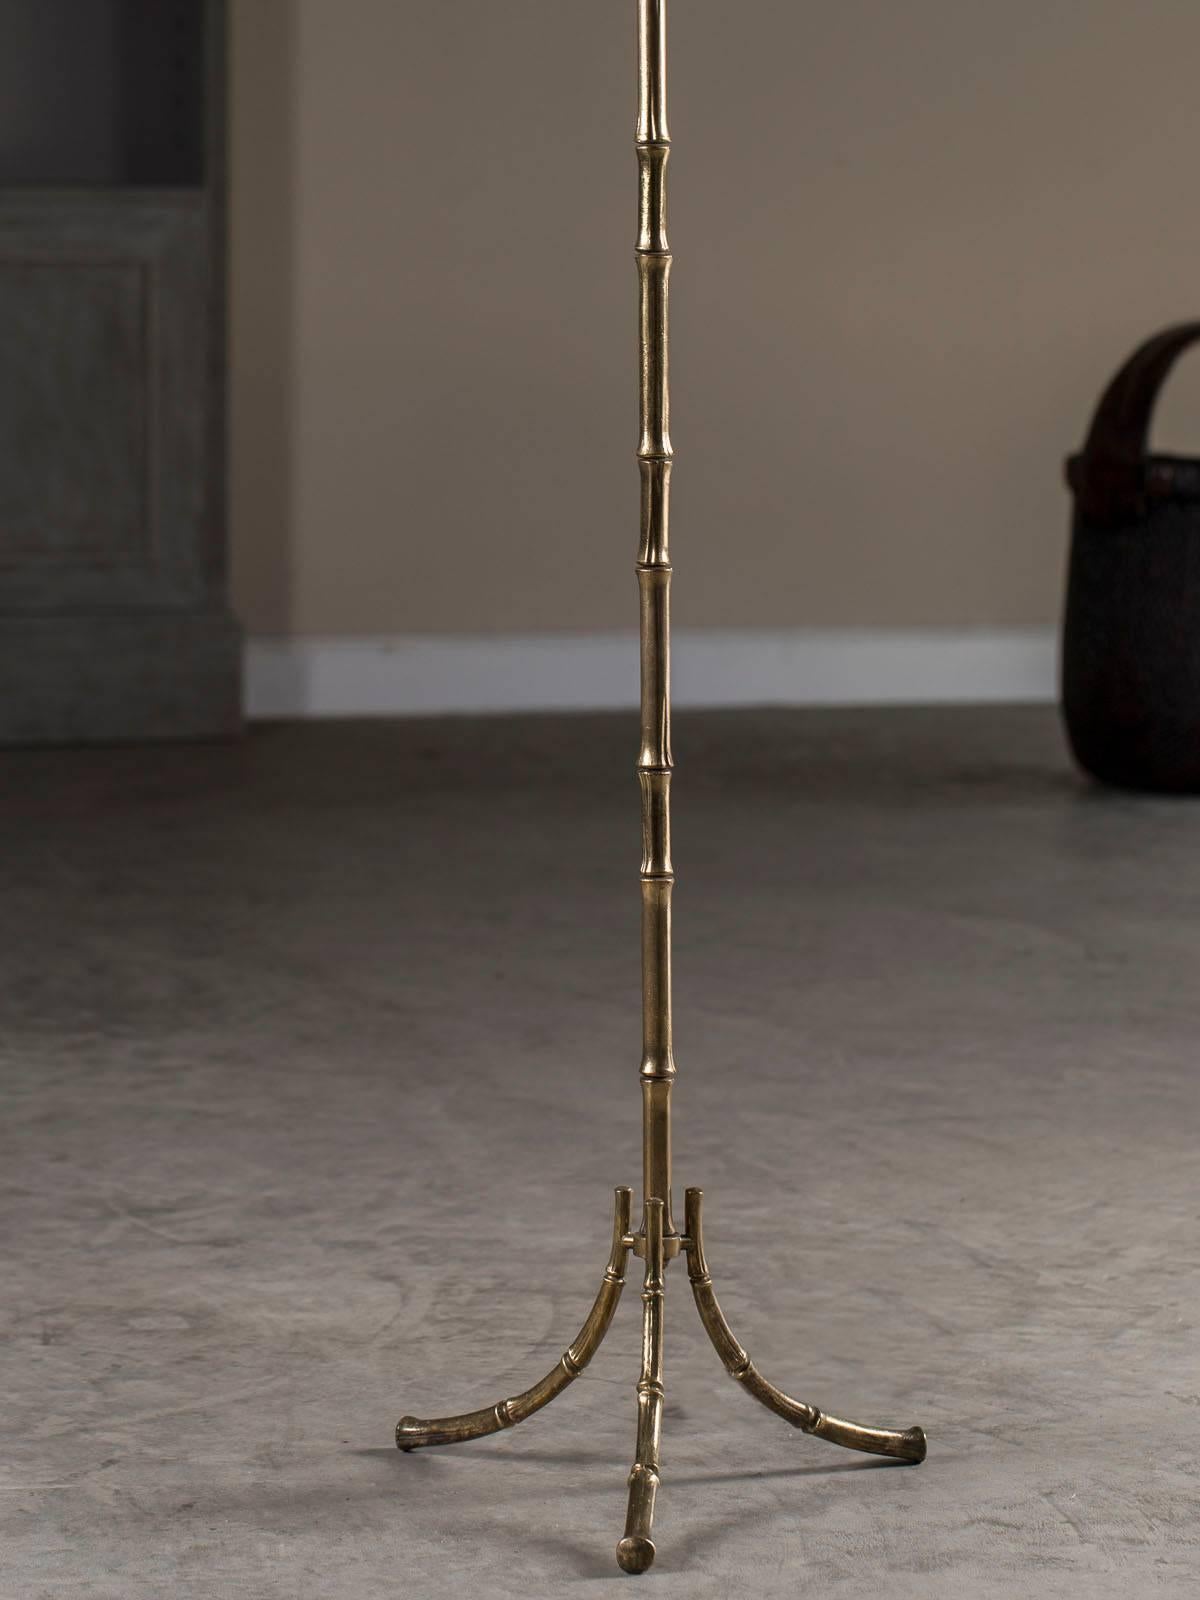 Ah, the classic style of faux bamboo designed by the famous decorating house of Maison Baguès. This elegant vintage French floor lamp, circa 1940, was a staple of interior design in fine French homes as the informal charm of bamboo was translated